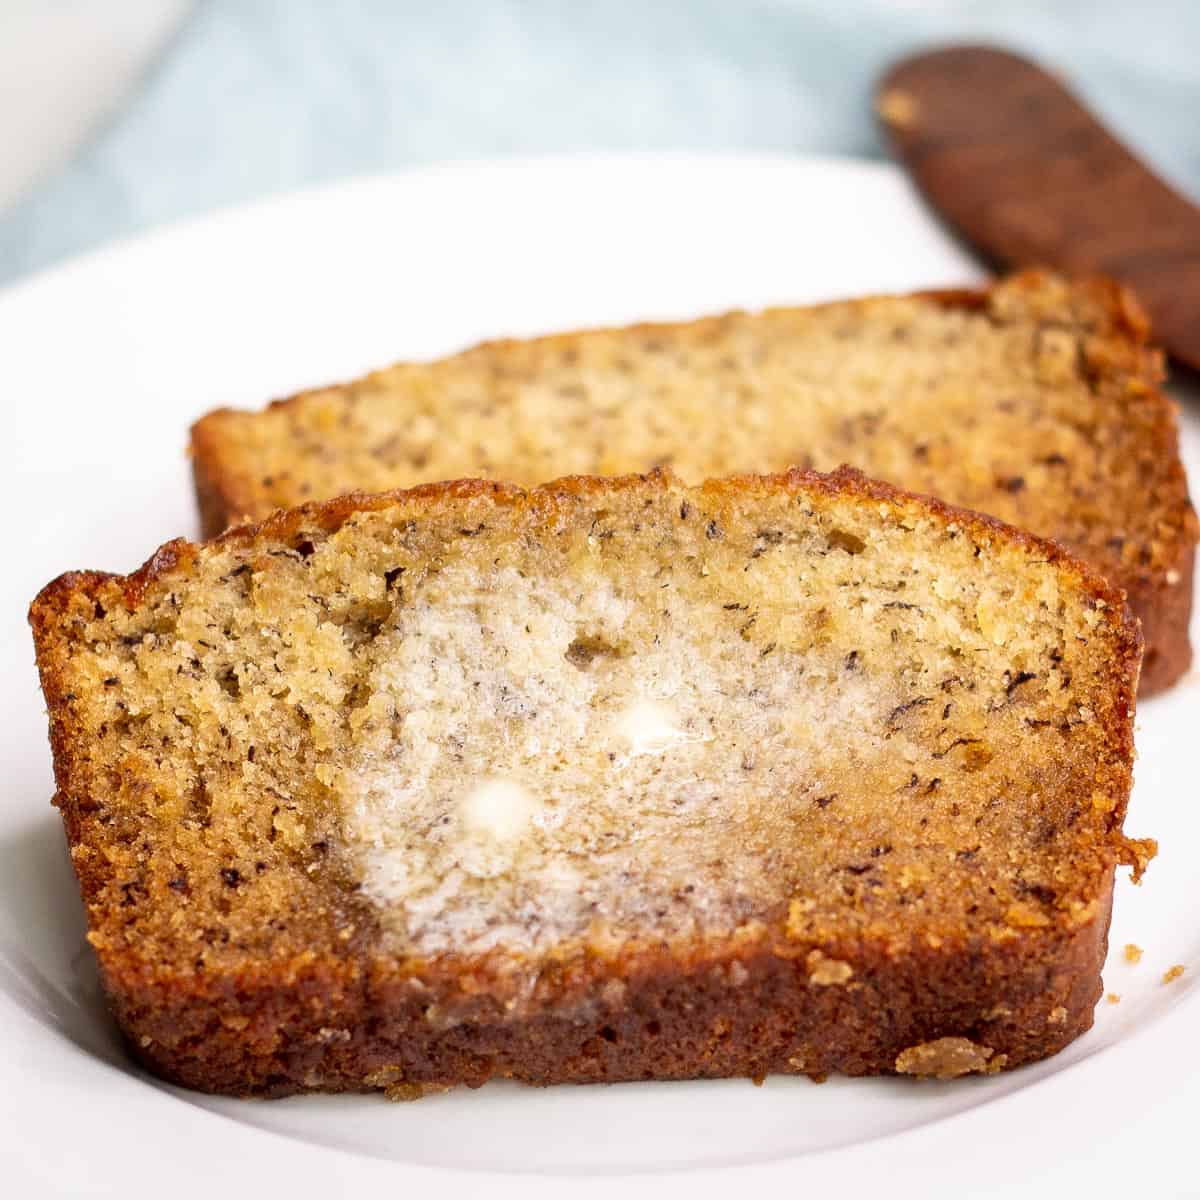 Sliced banana bread with melted butter on top.